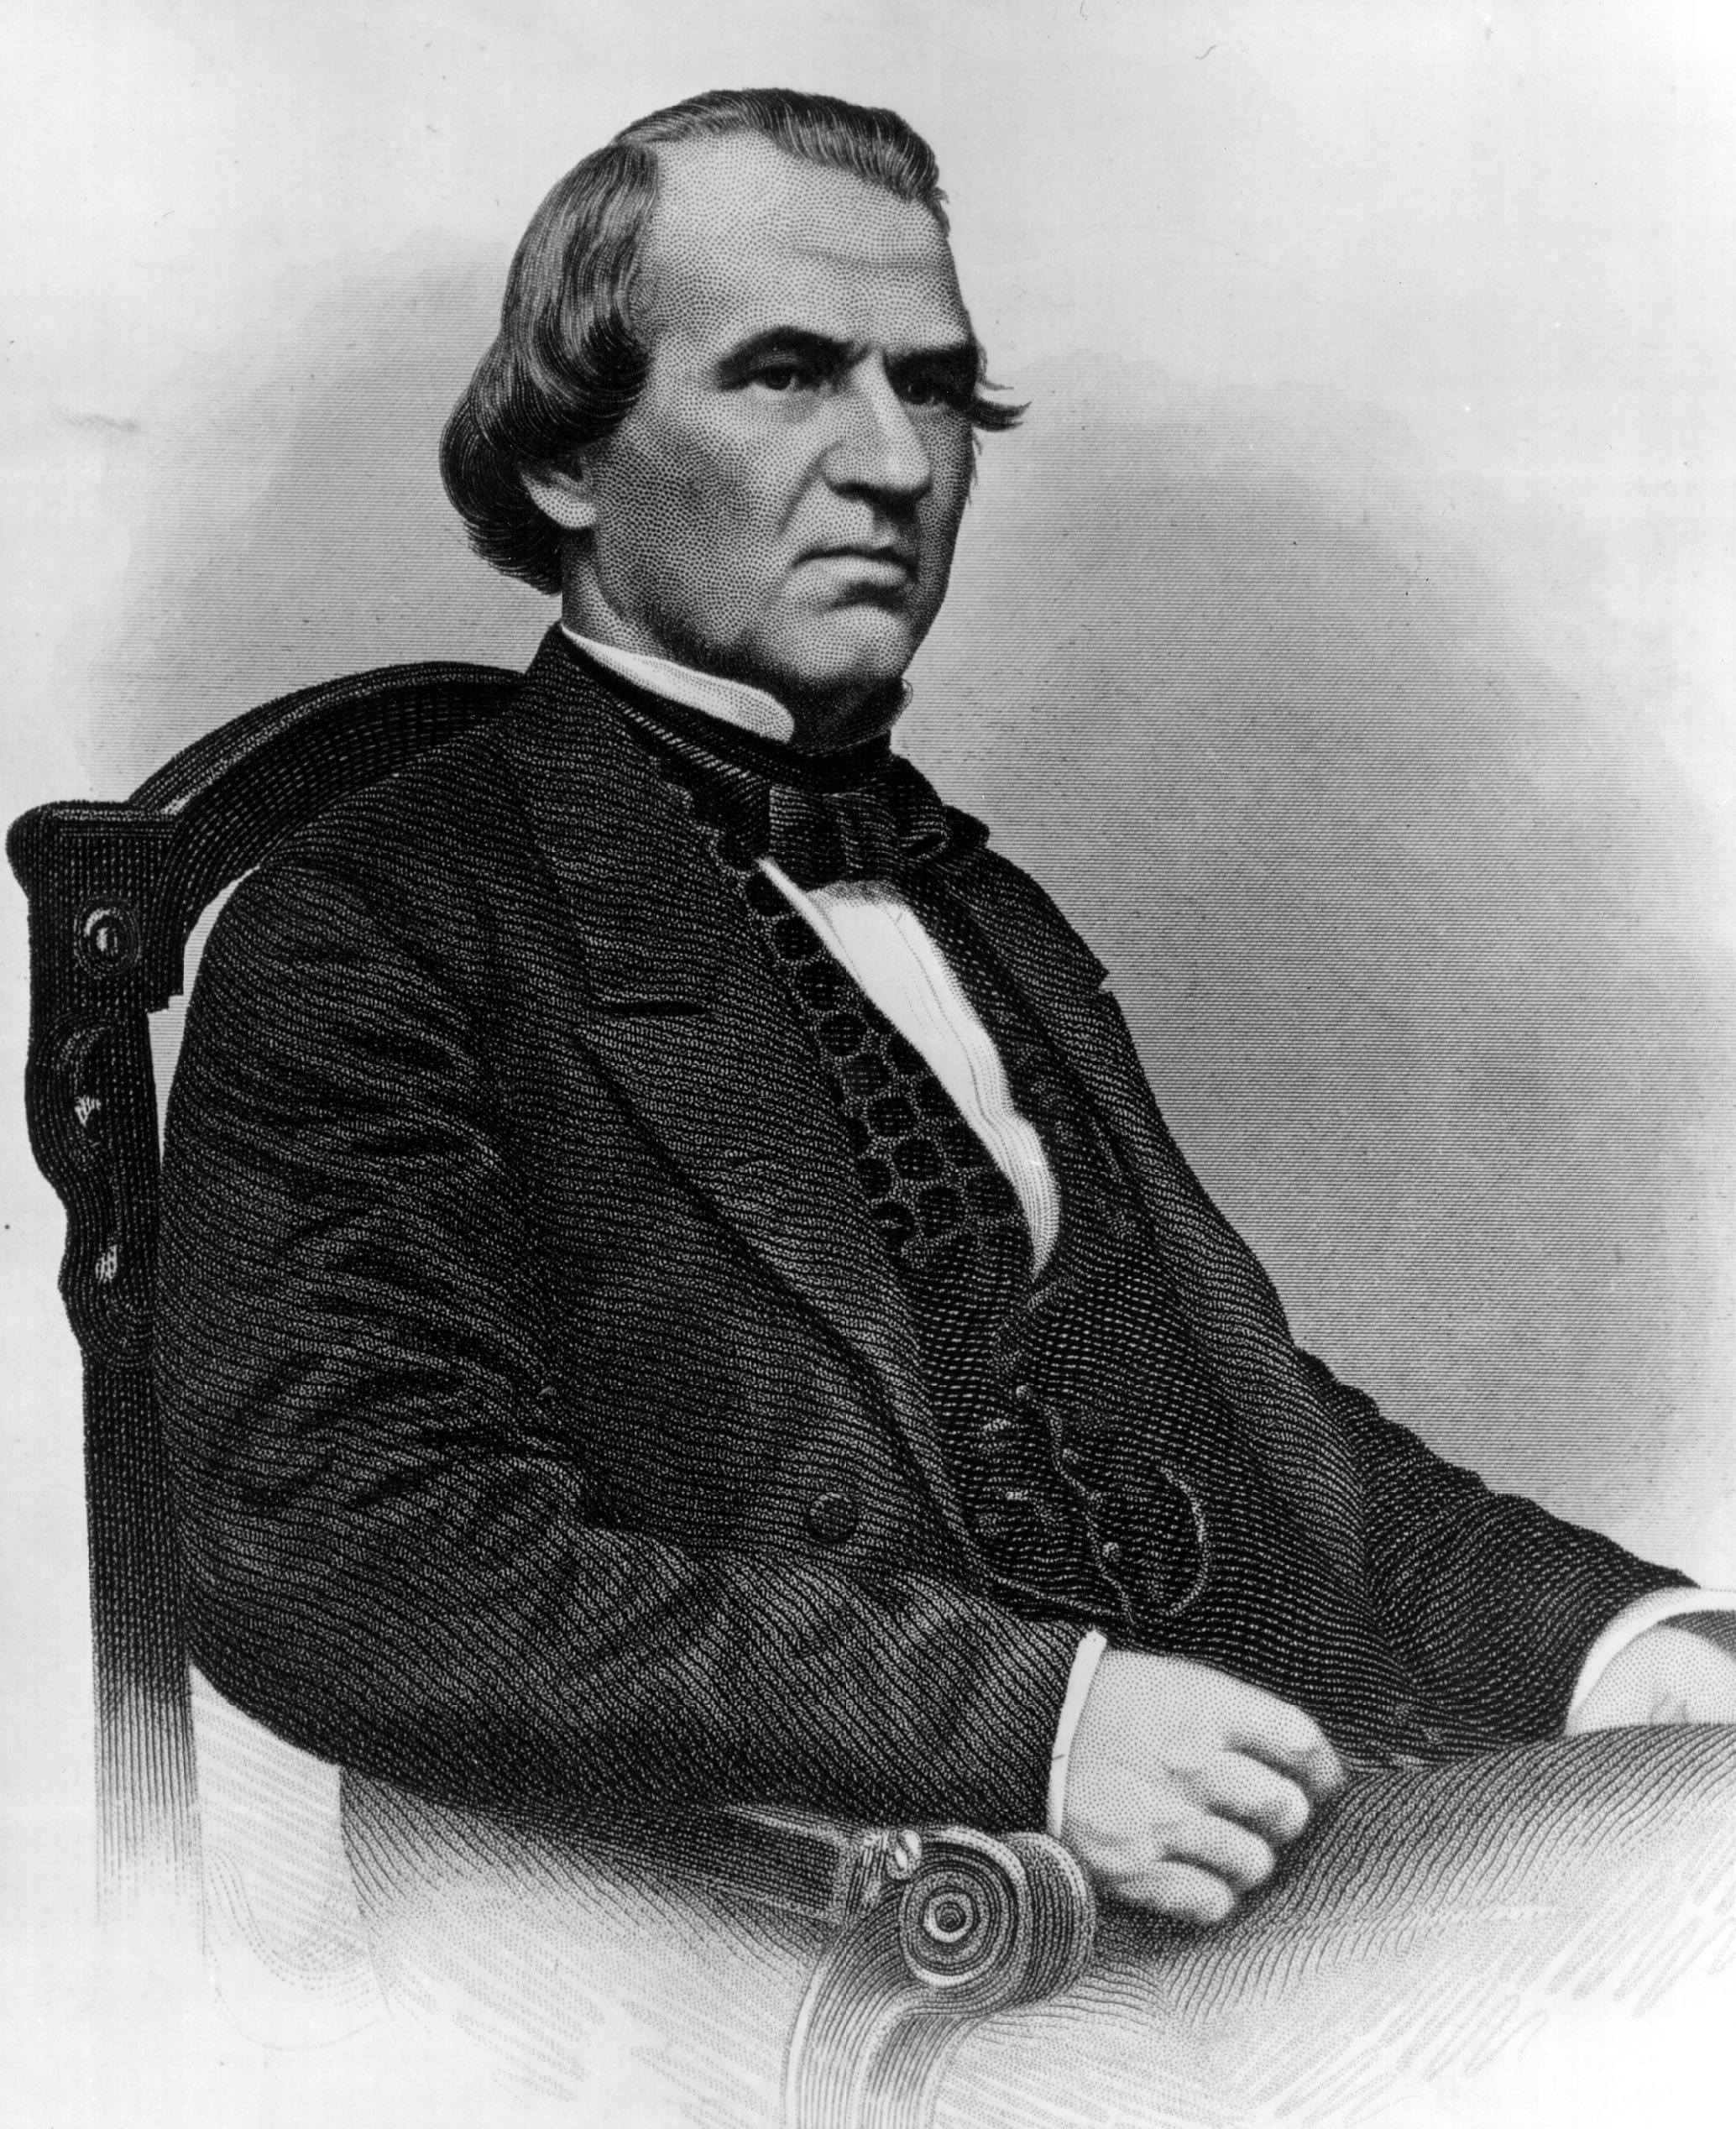 Andrew Johnson, seventeenth President of the United States